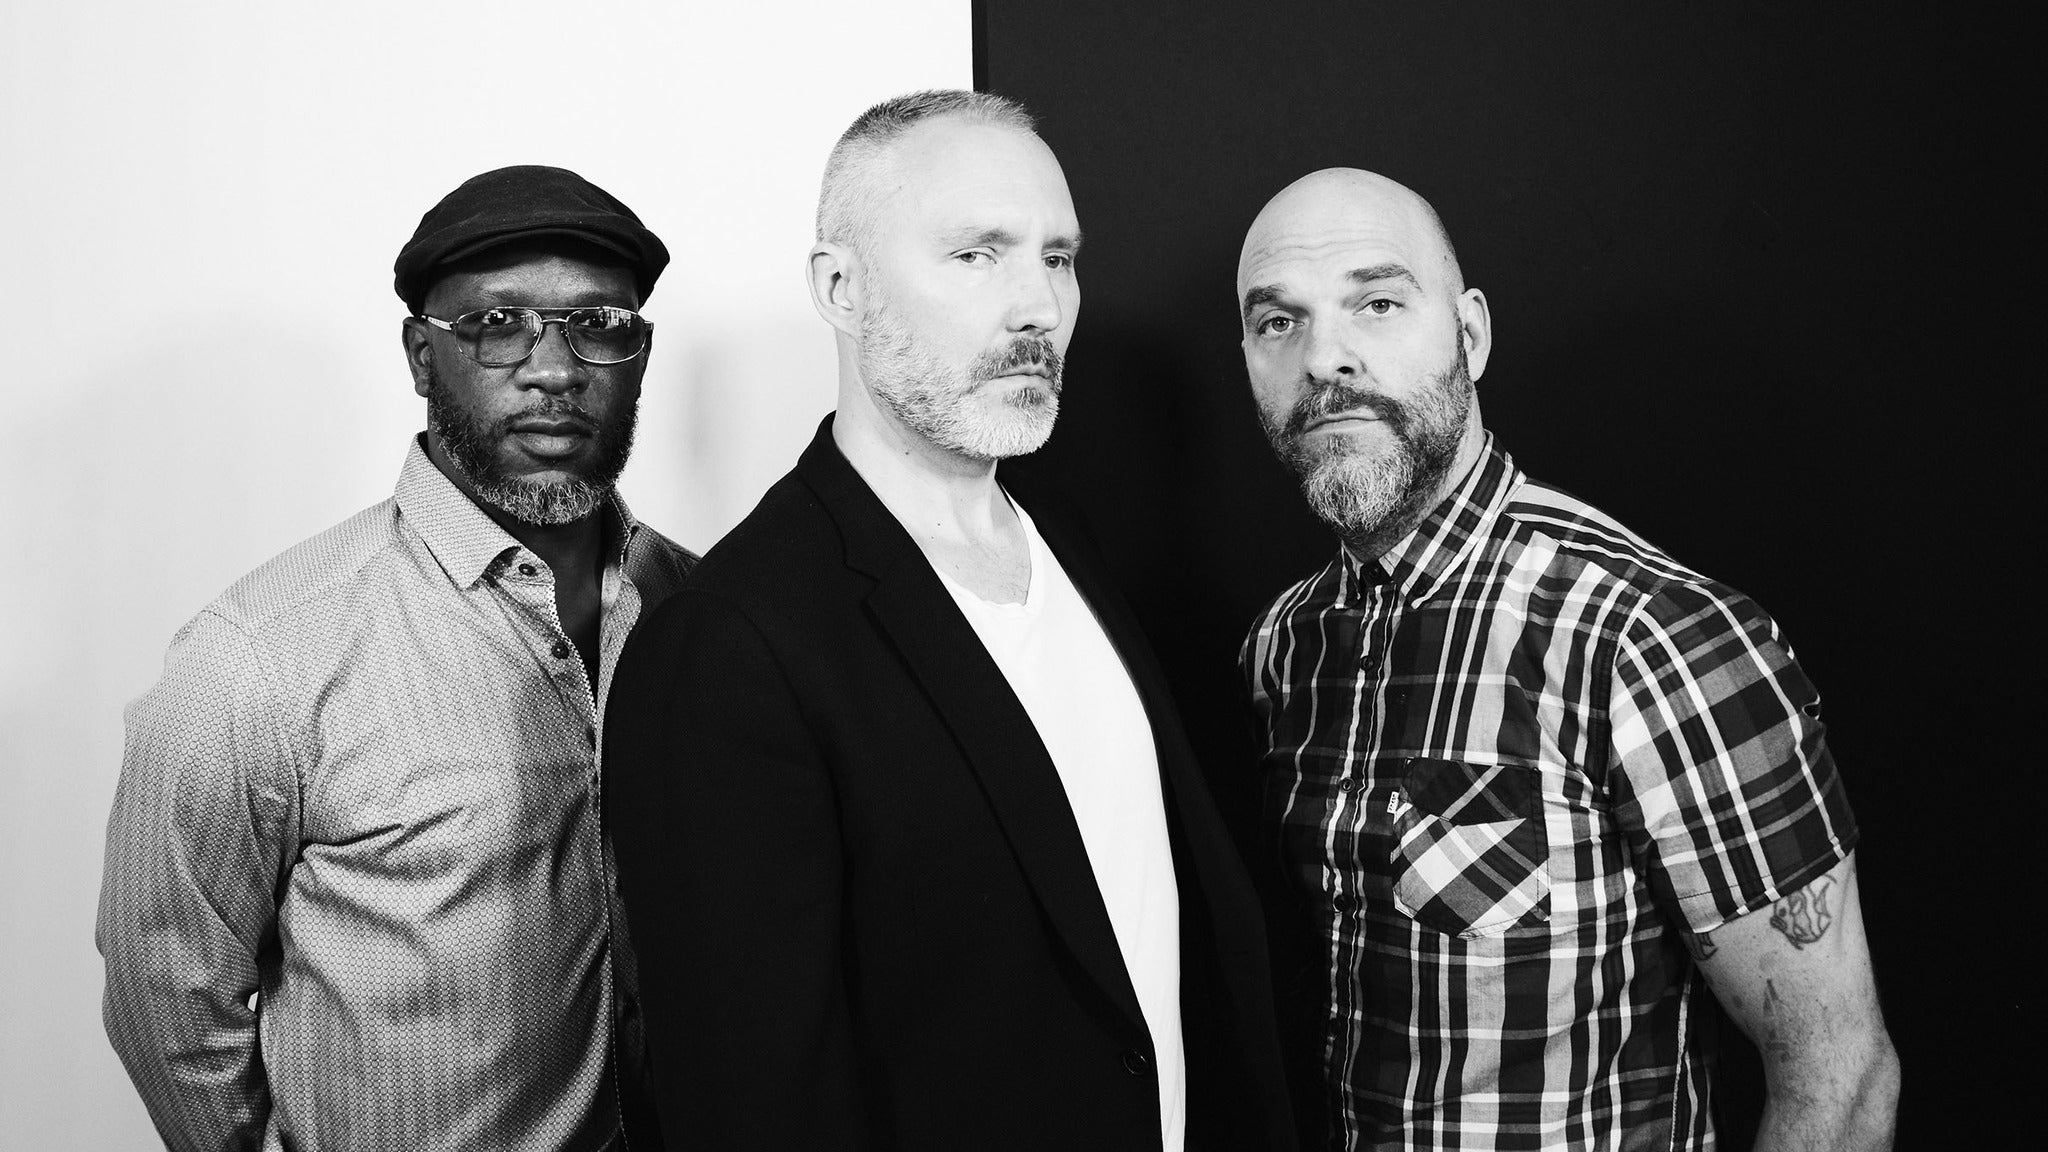 Image used with permission from Ticketmaster | The Bad Plus tickets